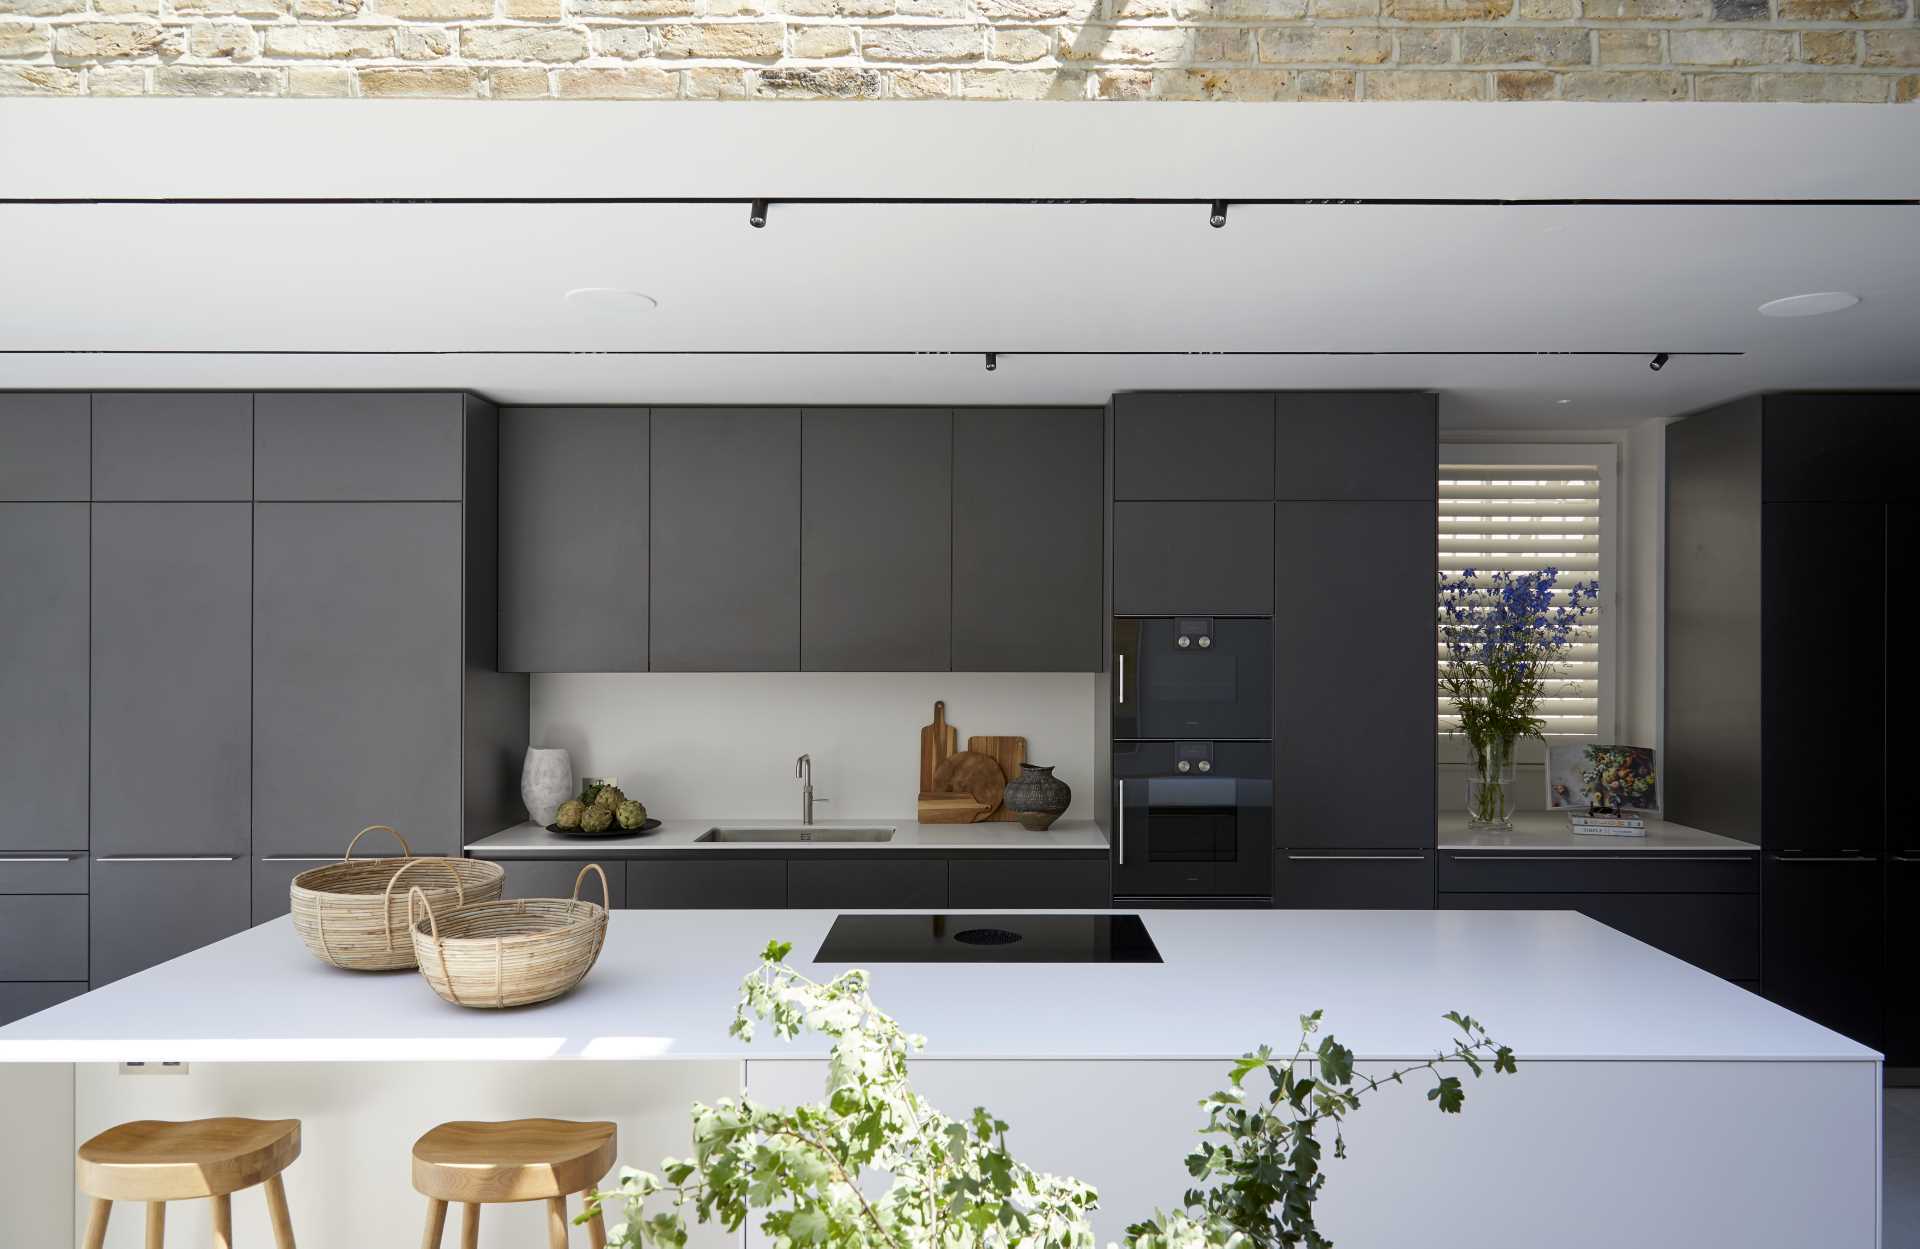 A modern kitchen with matte black cabinets, and a white backsplash and island.